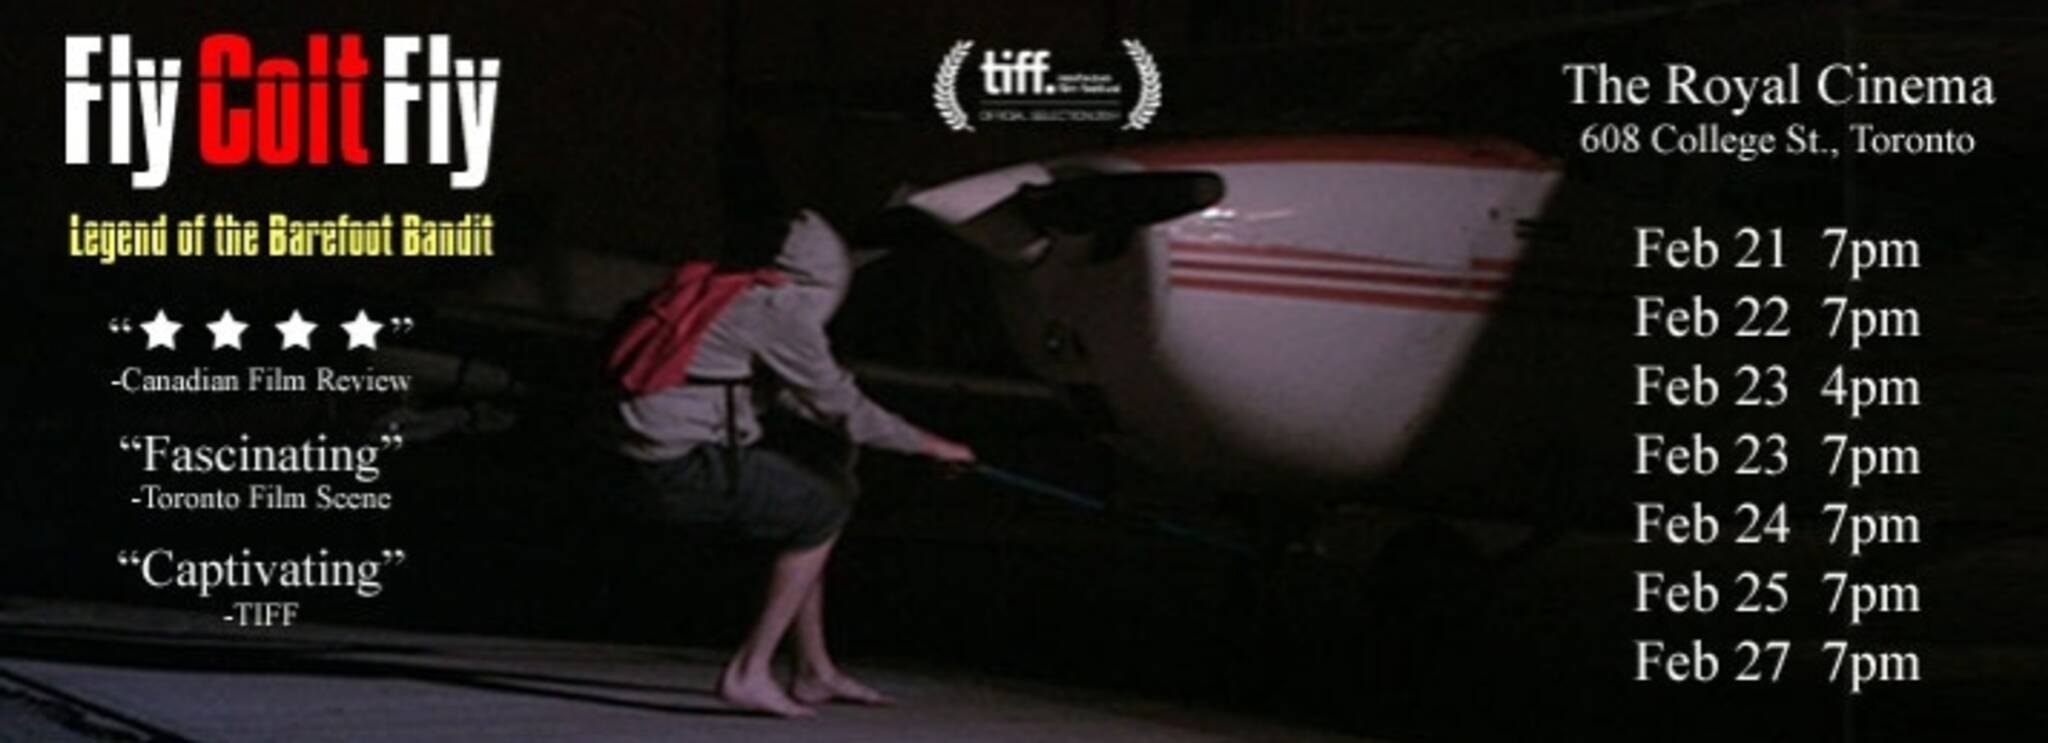 Fly Colt Fly : Legend OF The Barefoot Bandit - screening at The Royal Cinema